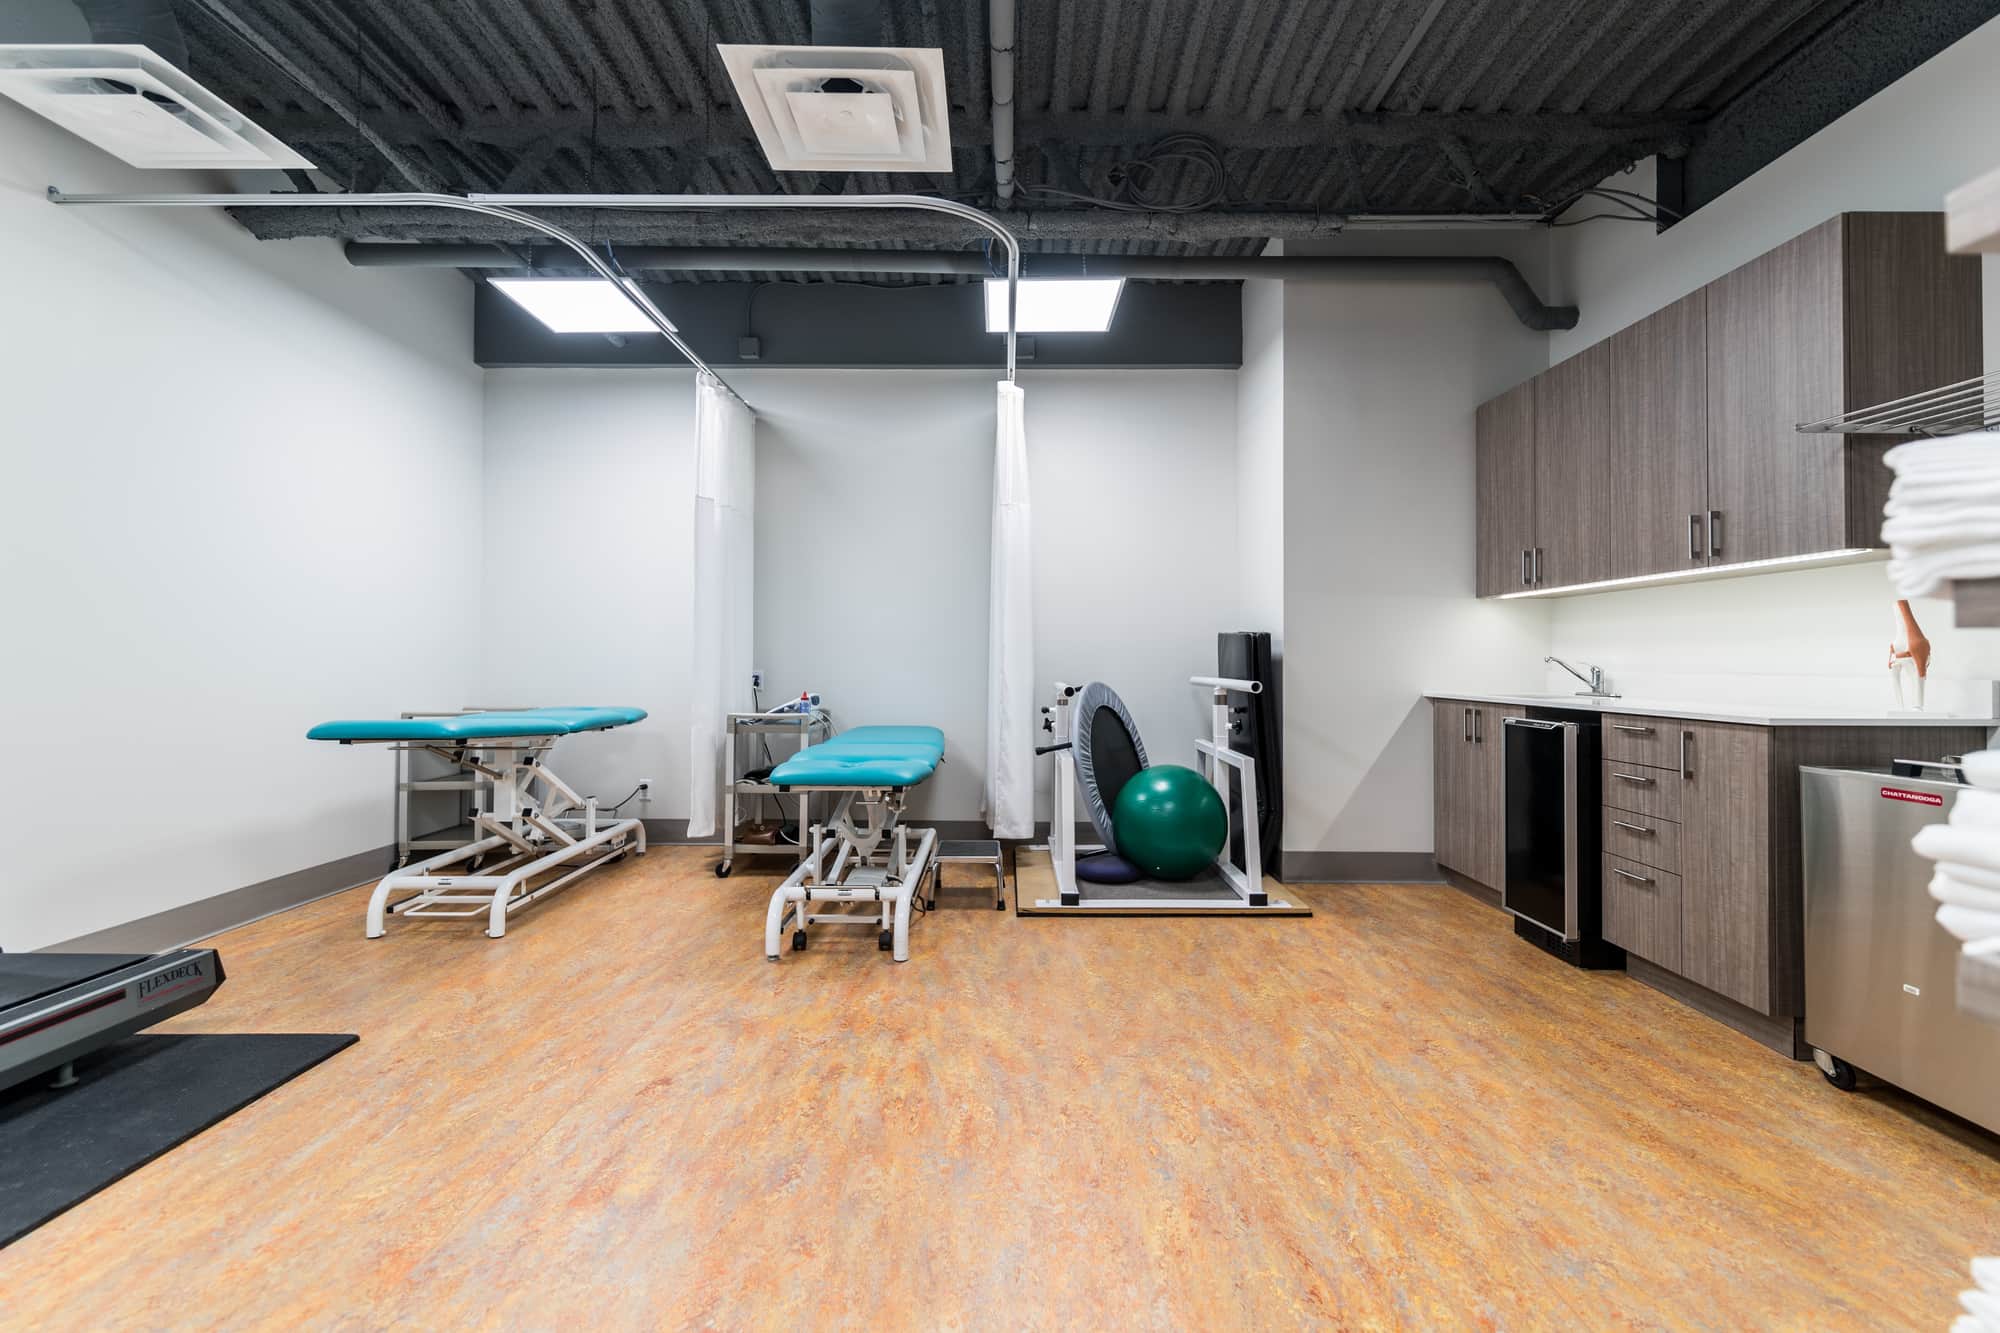 Physiotherapy Clinic Construction Stimula Reno Assistance